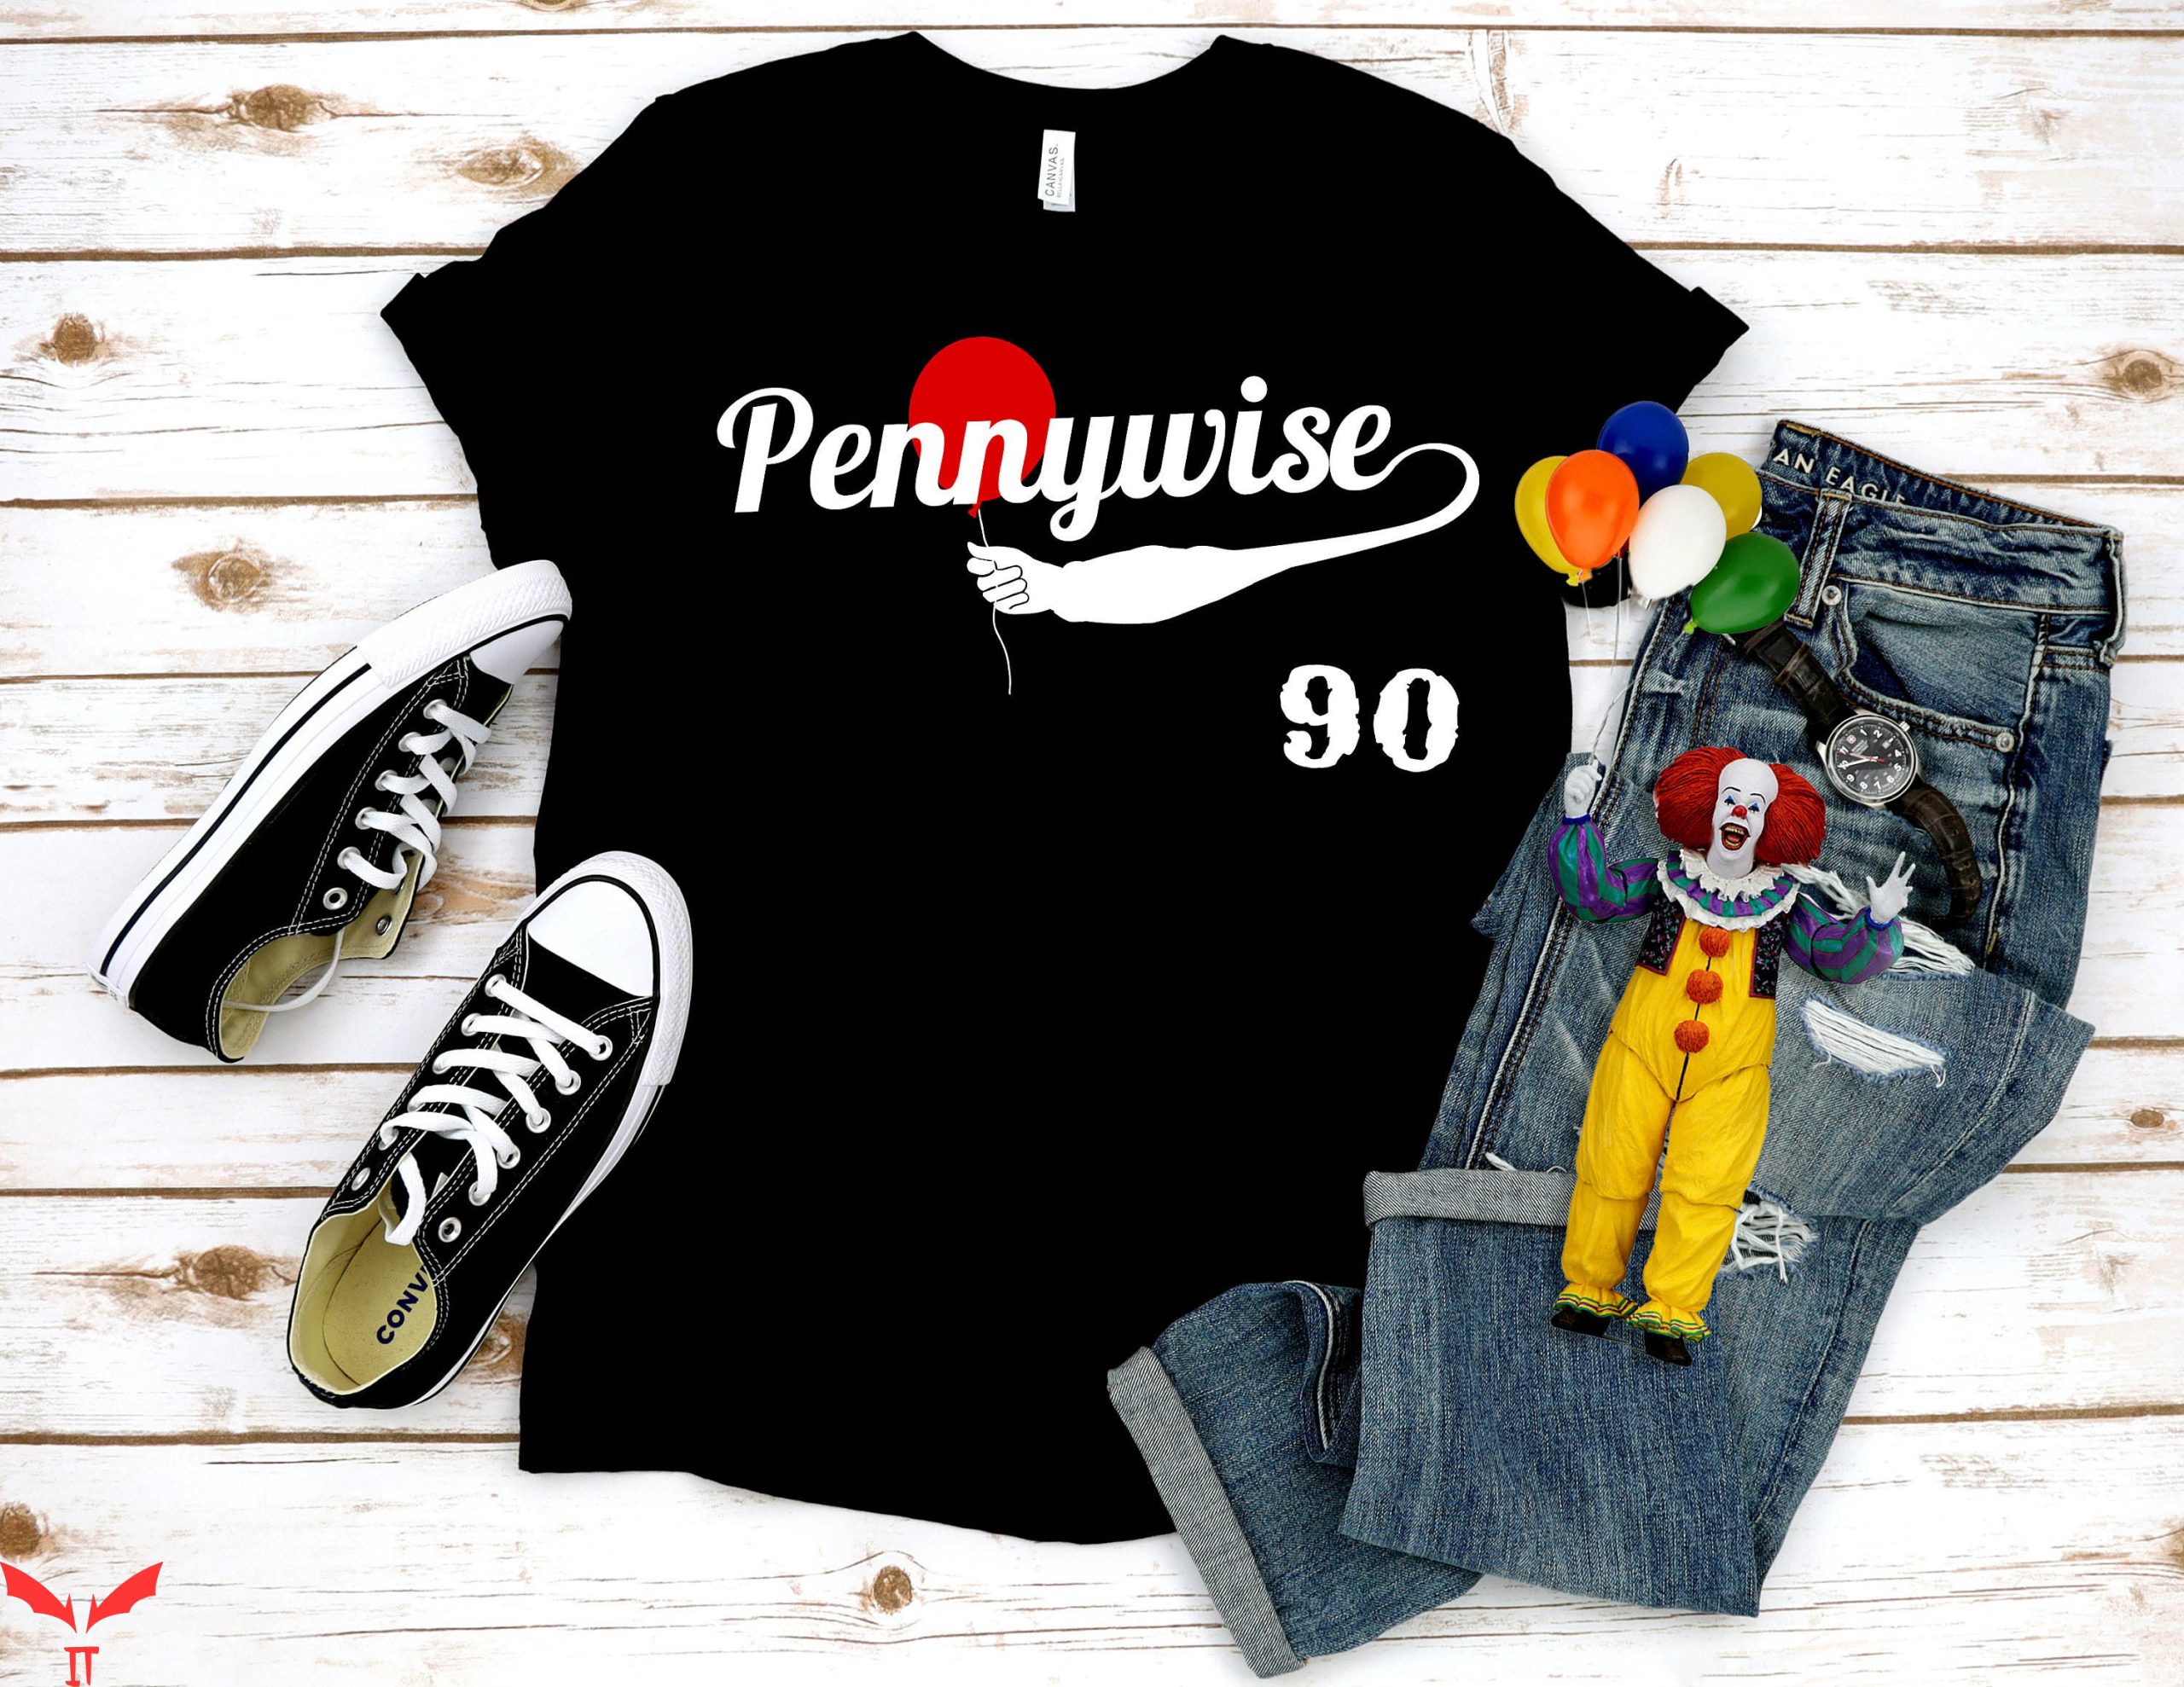 Pennywise 1990 T-Shirt IT Movie Jersey Horror Halloween